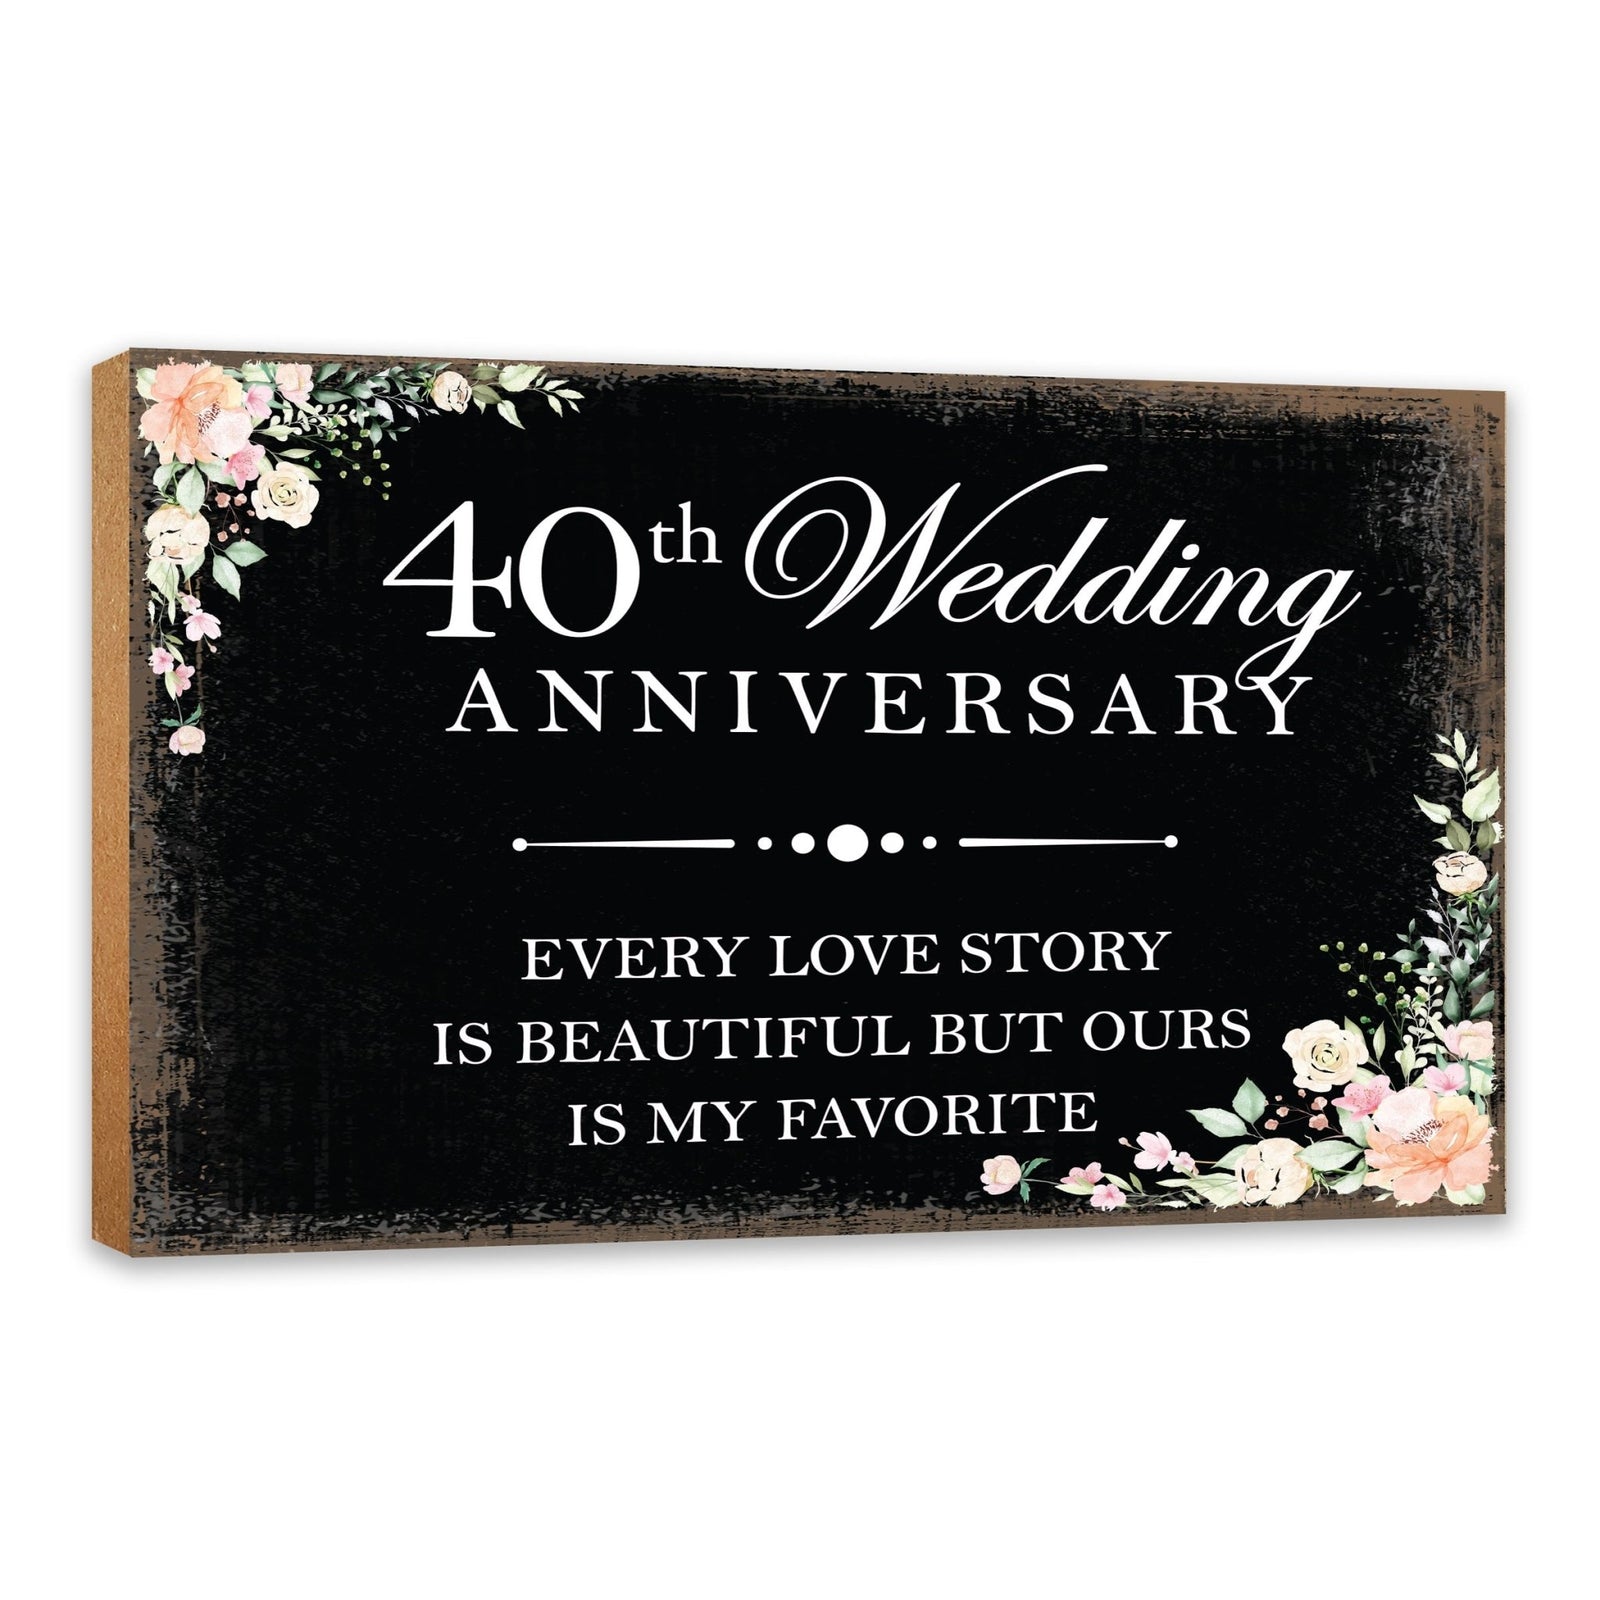 40th Wedding Anniversary Unique Shelf Decor and Tabletop Signs Gift for Couples - Every Love Story - LifeSong Milestones